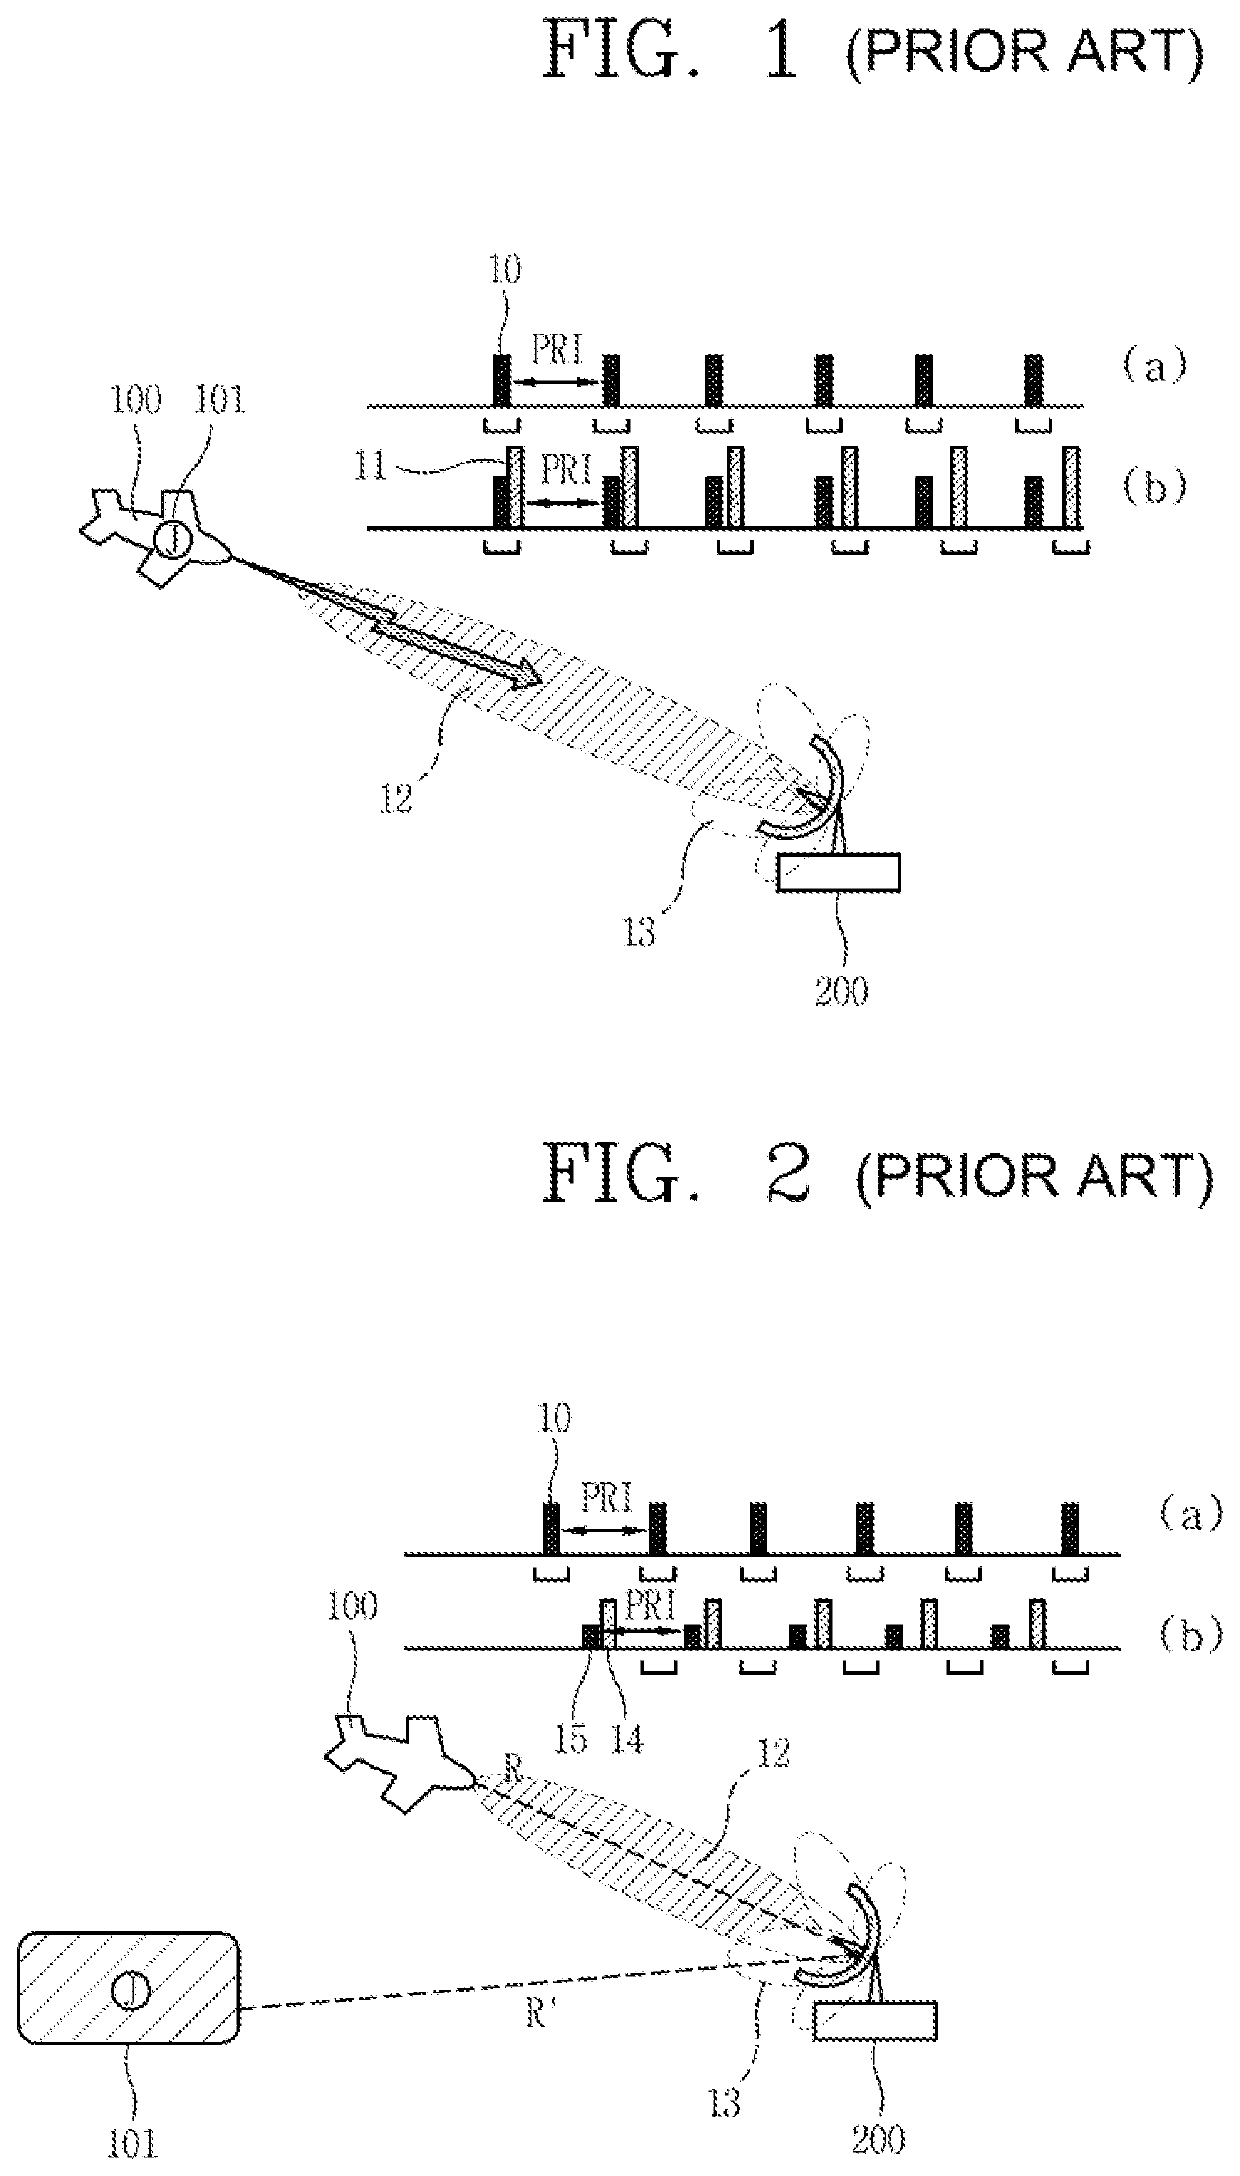 Synchronous side lobe jamming method for electronic attack